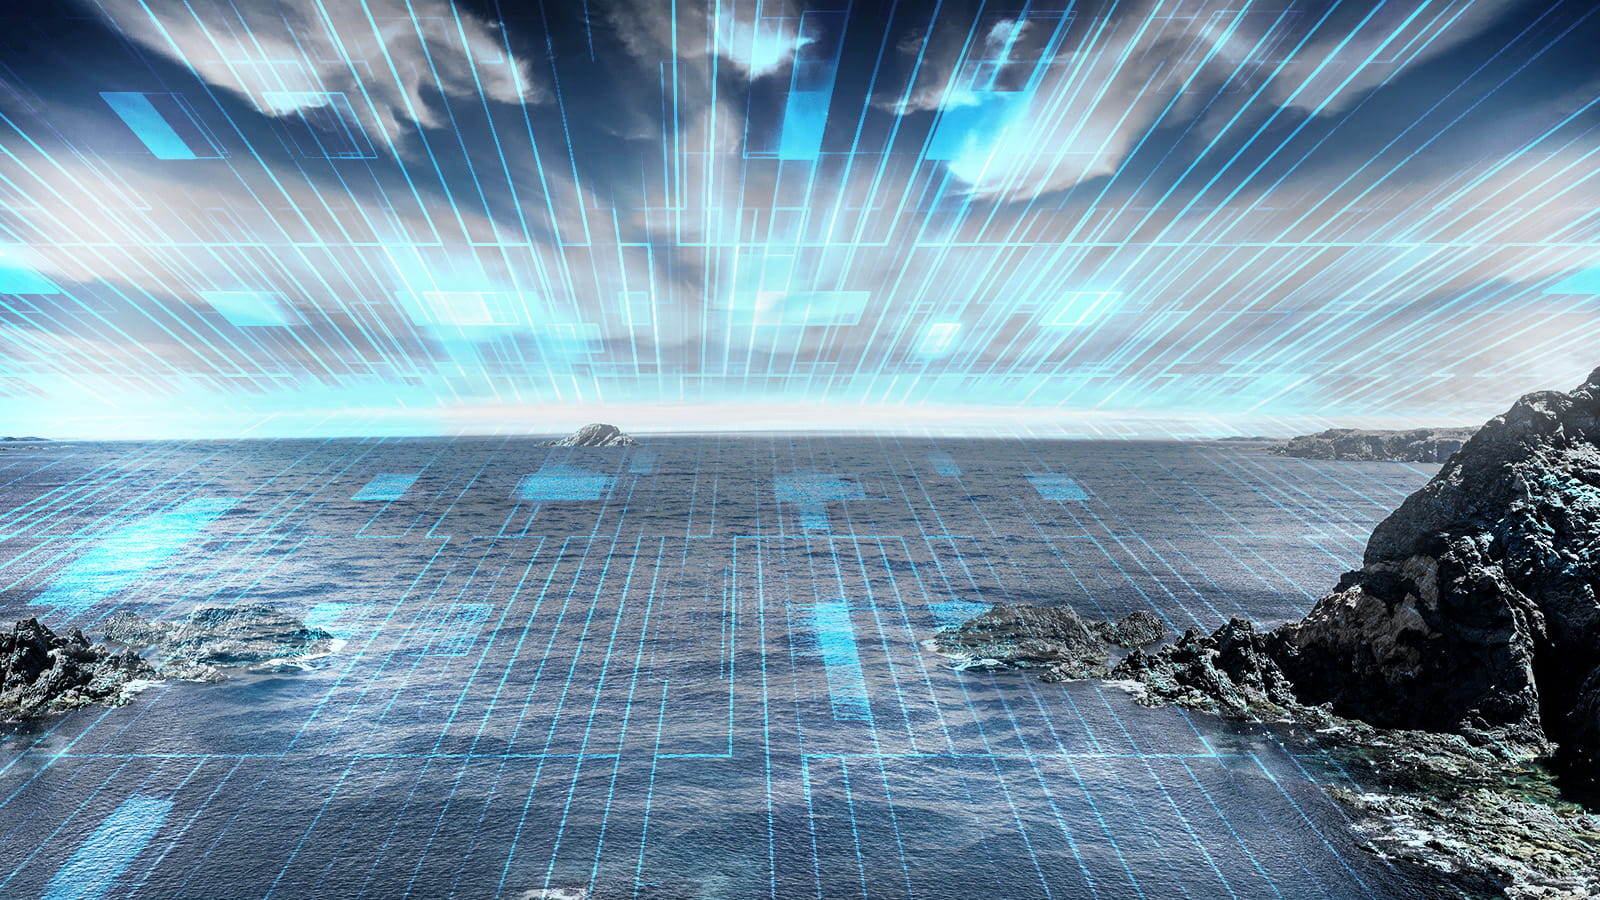 An artist's rendering of the sea and coastline with radio waves to depict ground and ship-based defense sensors.